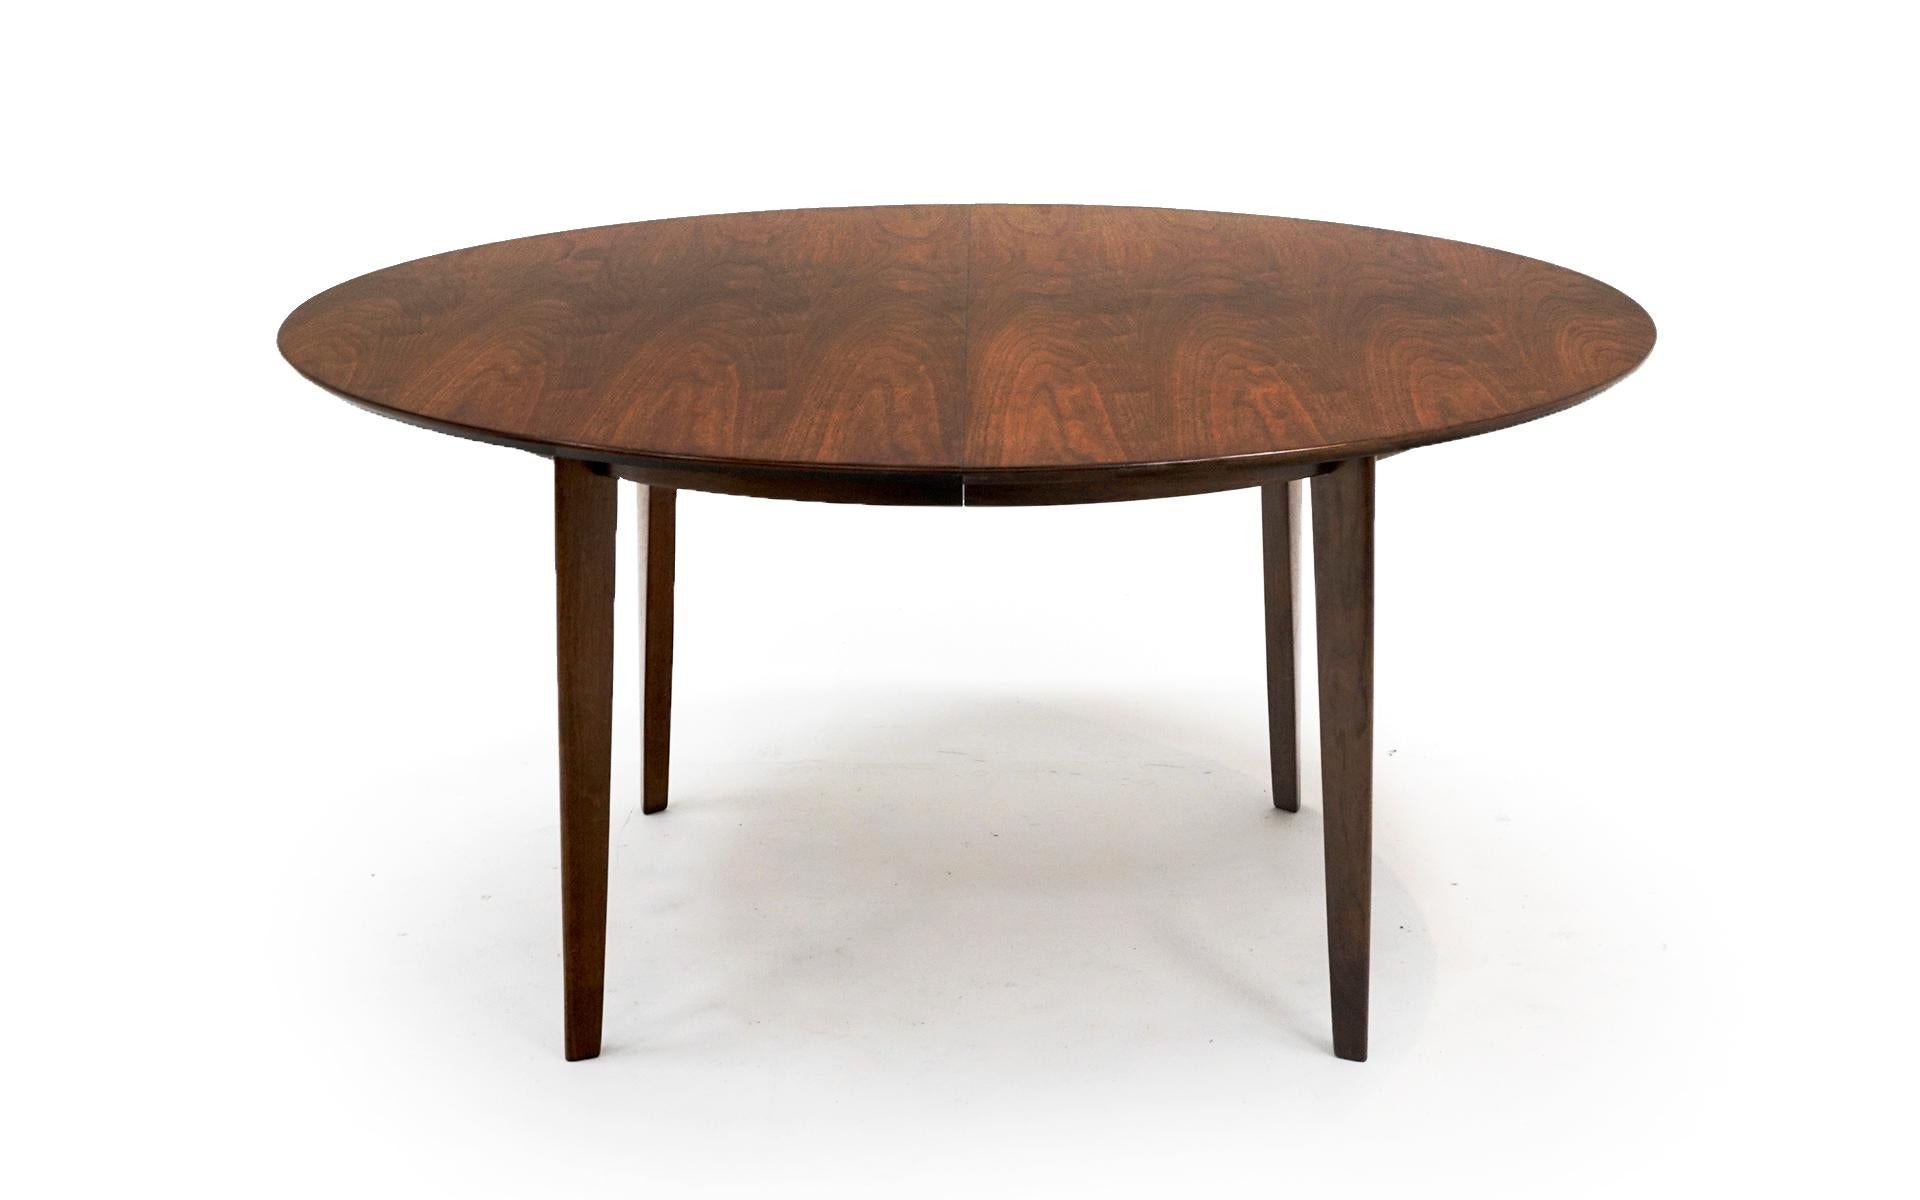 Walnut oval, almost round, dining table with two leaves designed by Edward Wormley for Dunbar. Heavy duty construction. Original finish with only very light signs of wear if any.  This table will see 10

Width without leaves is 60 inches. Each leaf